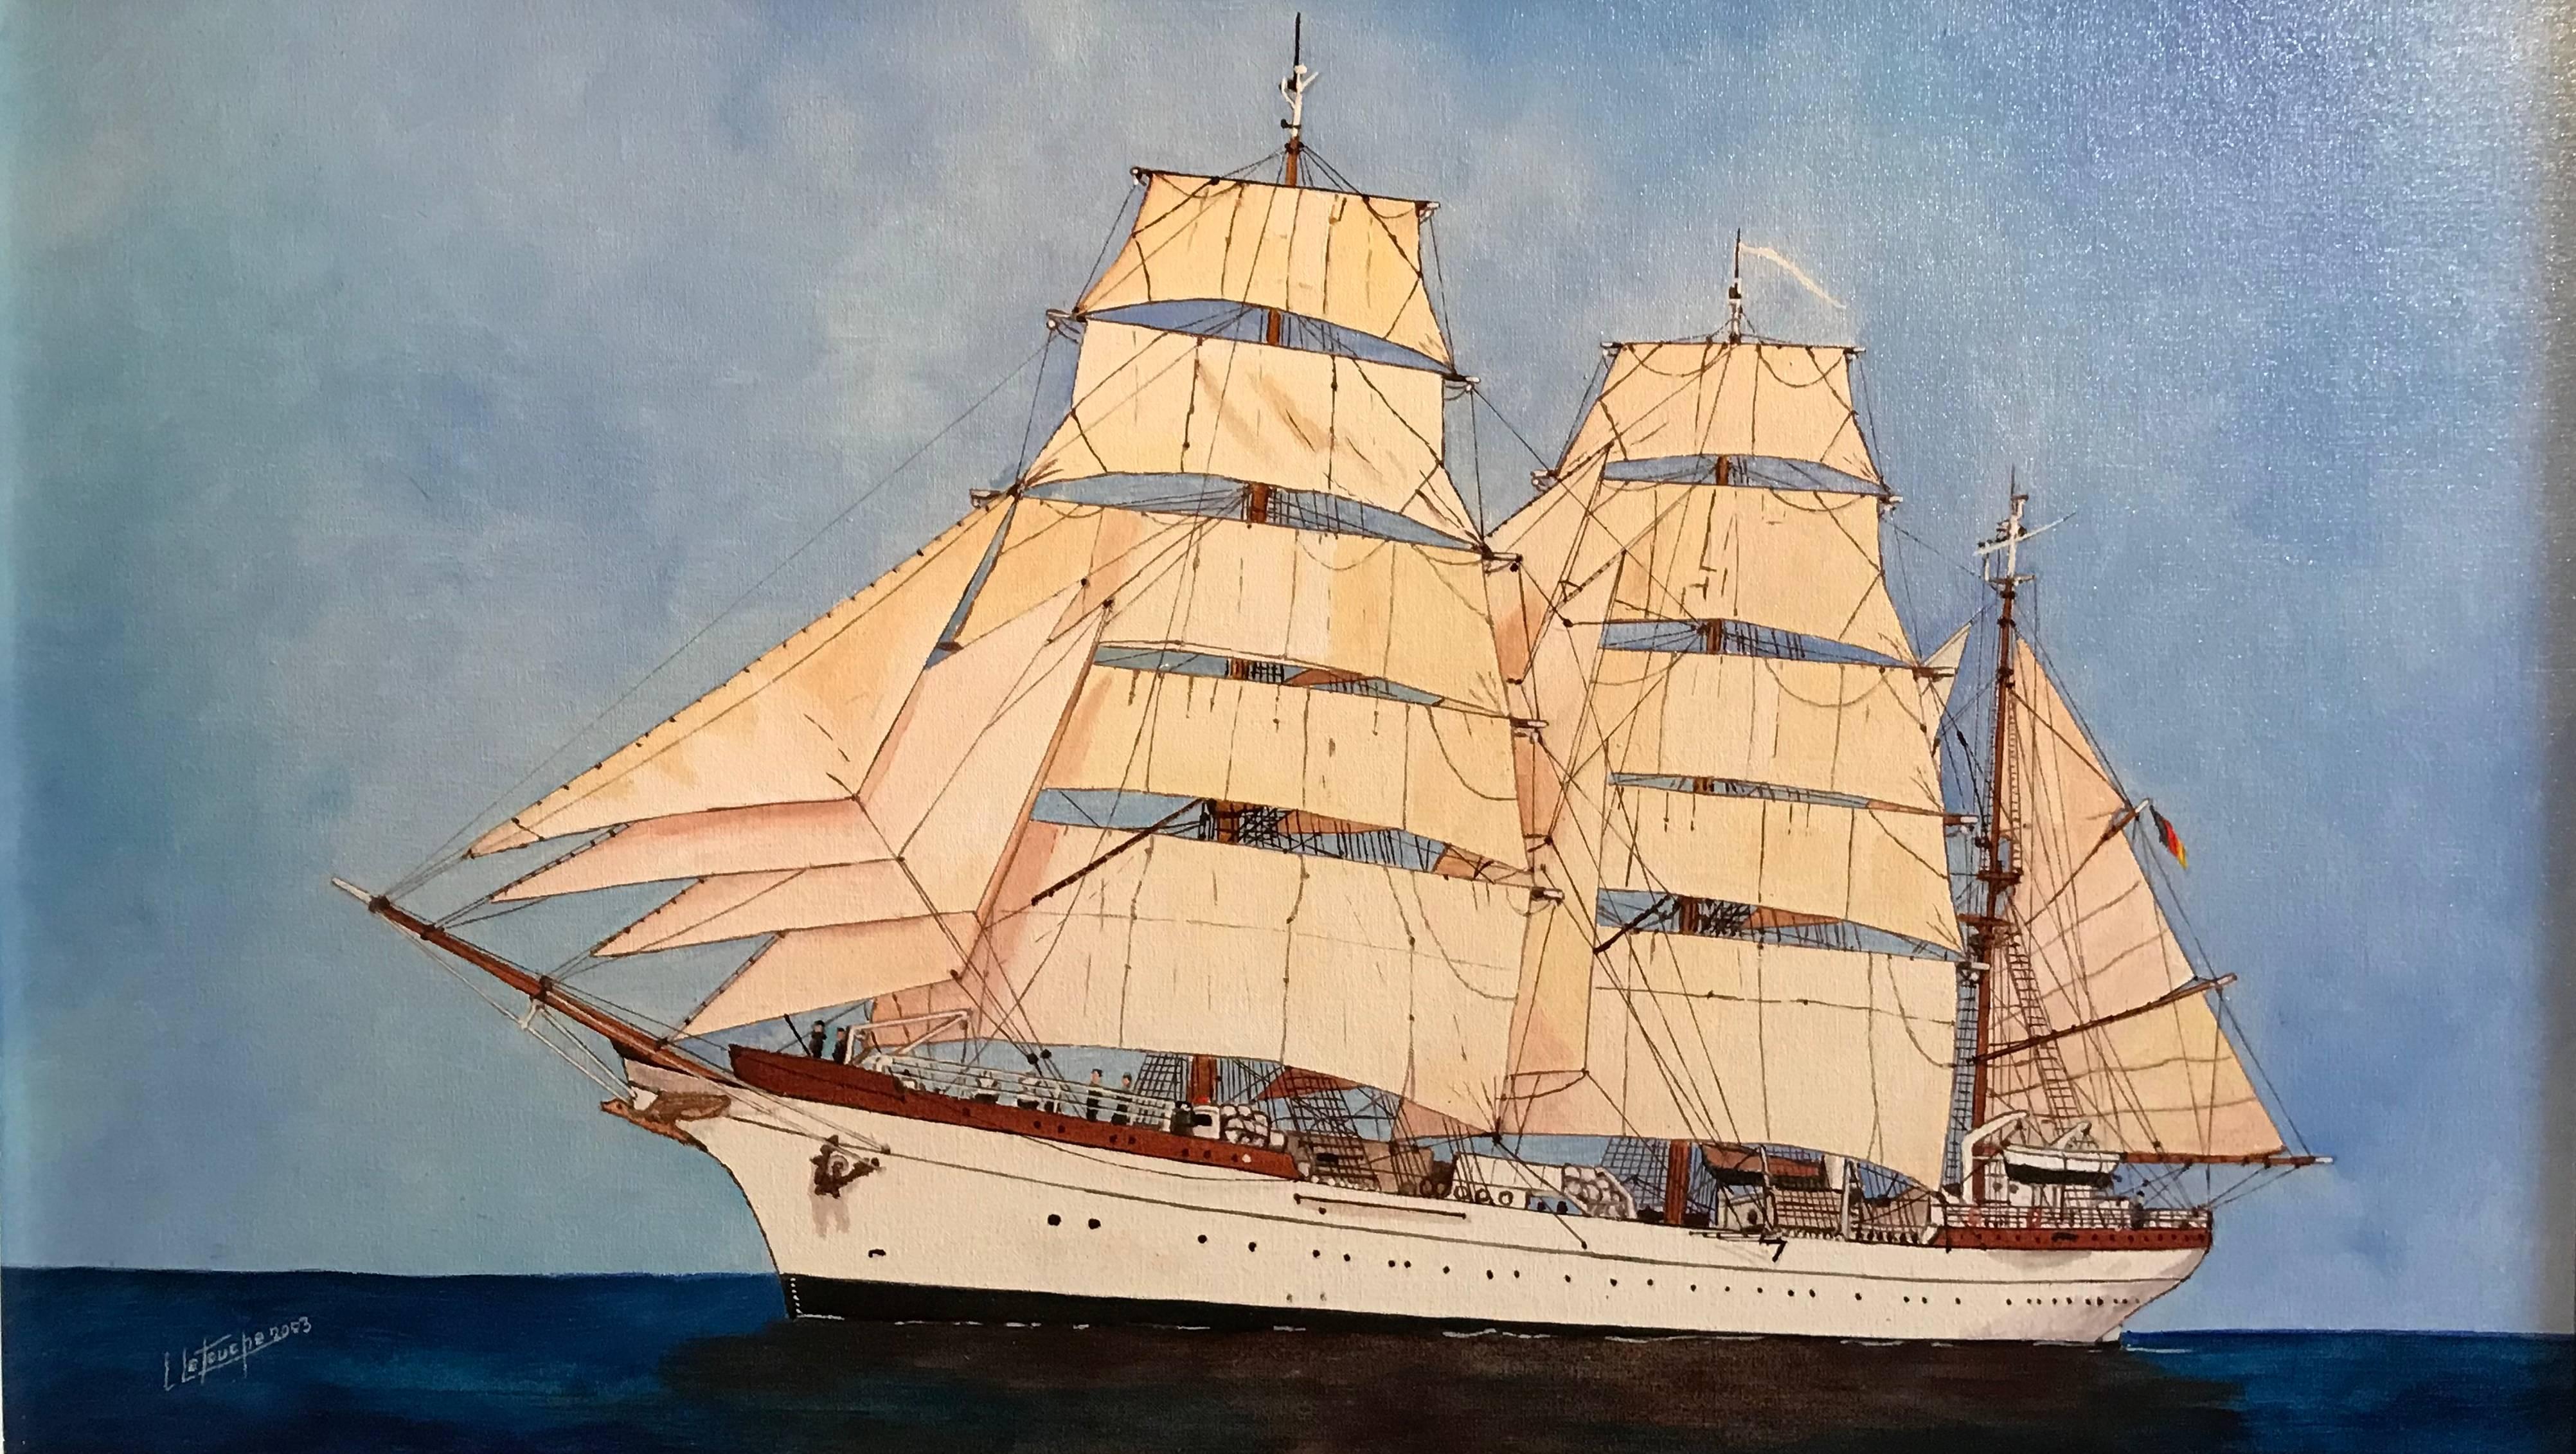 The Gorch Fock II Tall Ship of the German Navy